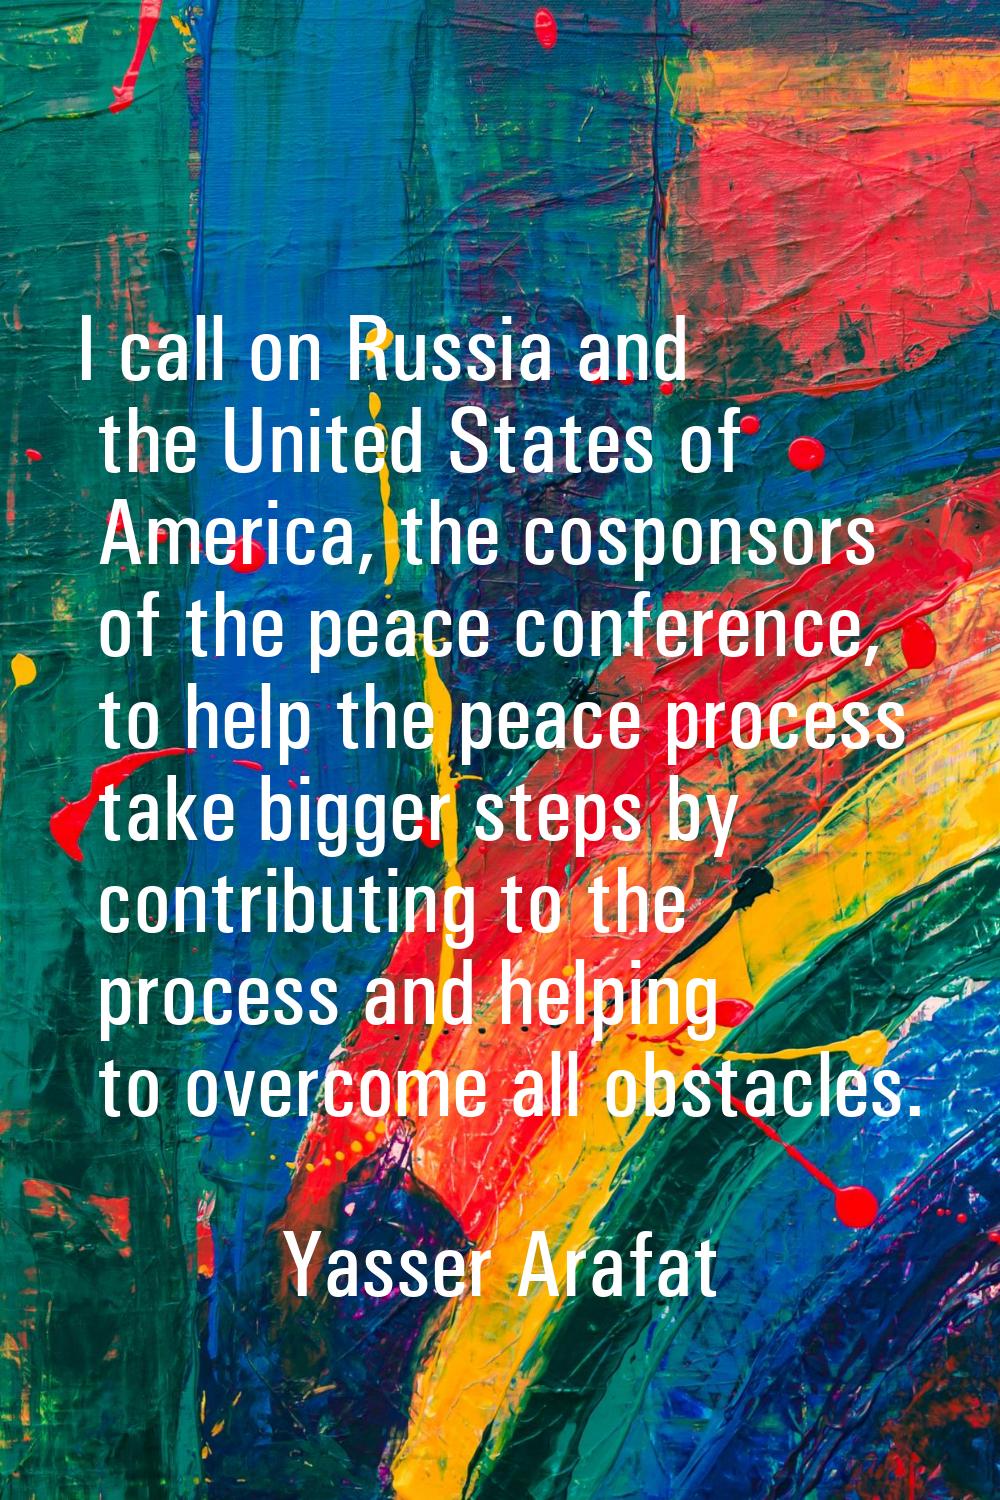 I call on Russia and the United States of America, the cosponsors of the peace conference, to help 